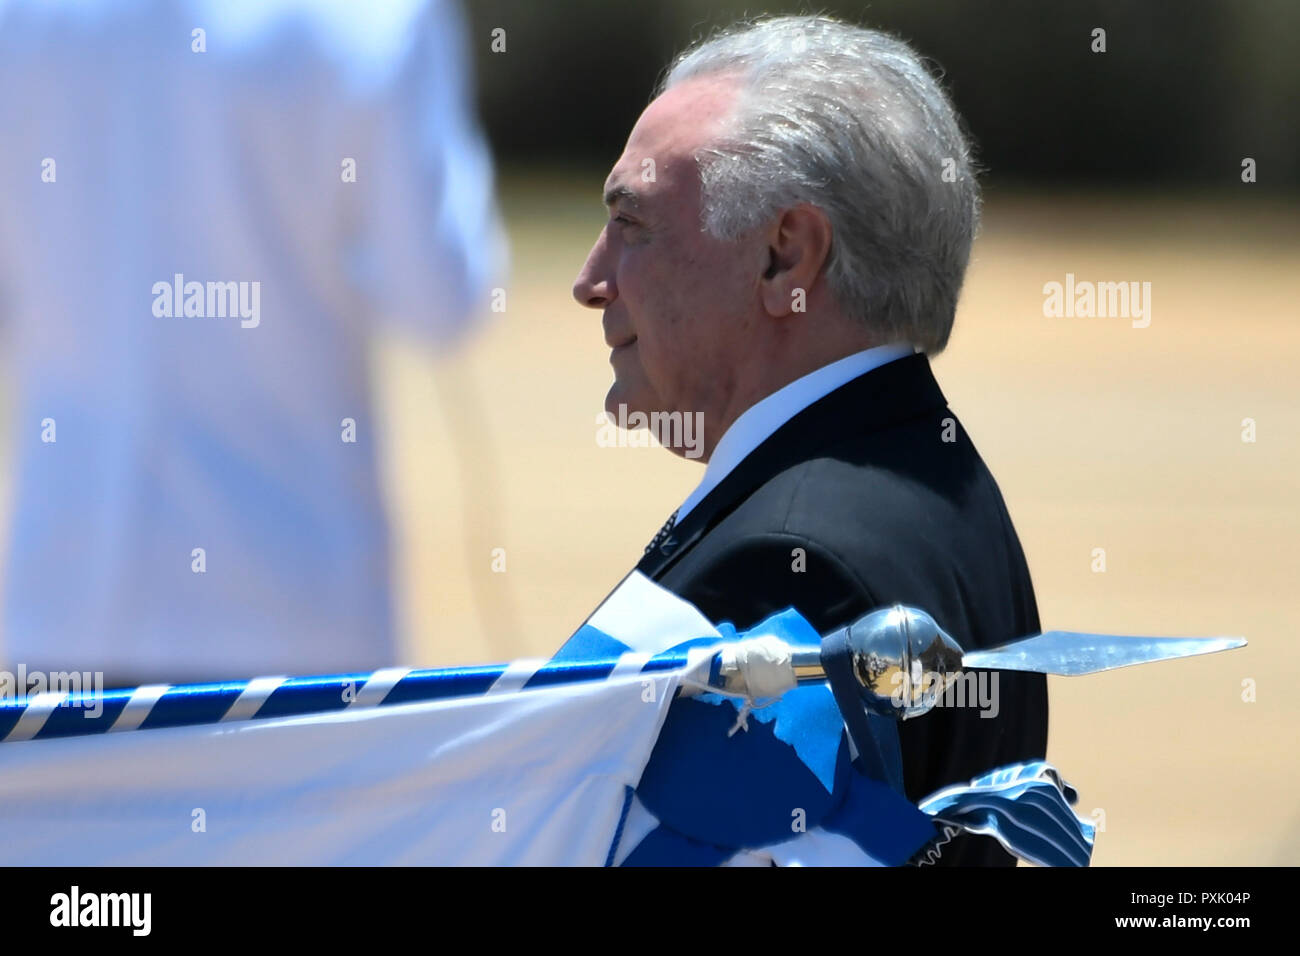 Brasilia, Brazil. 23rd Oct 2018. DF - Brasilia - 10/23/2018 - Military Solemnity Allusive to Aviator Day and Brazilian Air Force Day - Michel Temer, President of the Republic, during Military Solemn Allusive to Airman's Day and Brazilian Air Force Day this Tuesday , October 23, held at the Air Base. Photo: Mateus Bonomi / AGIF Credit: AGIF/Alamy Live News Stock Photo